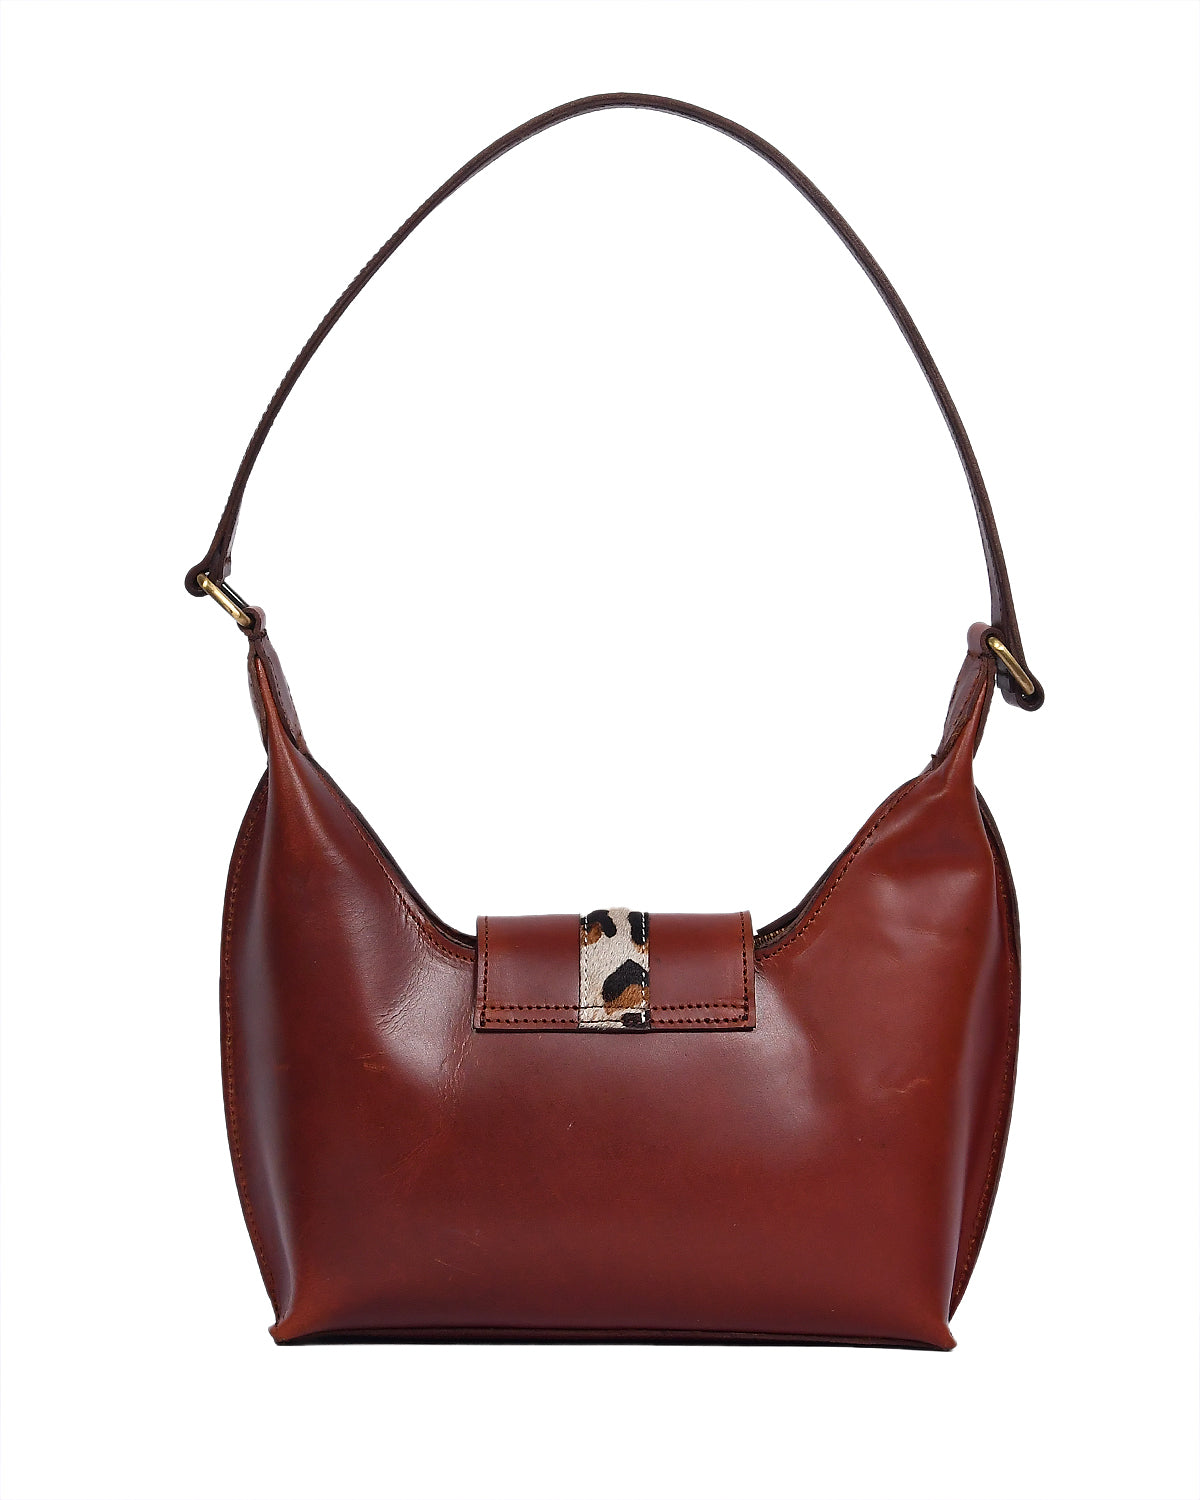 Brown Leather Shoulder Bag - The Perfect Blend of Style and Functionality. - CELTICINDIA